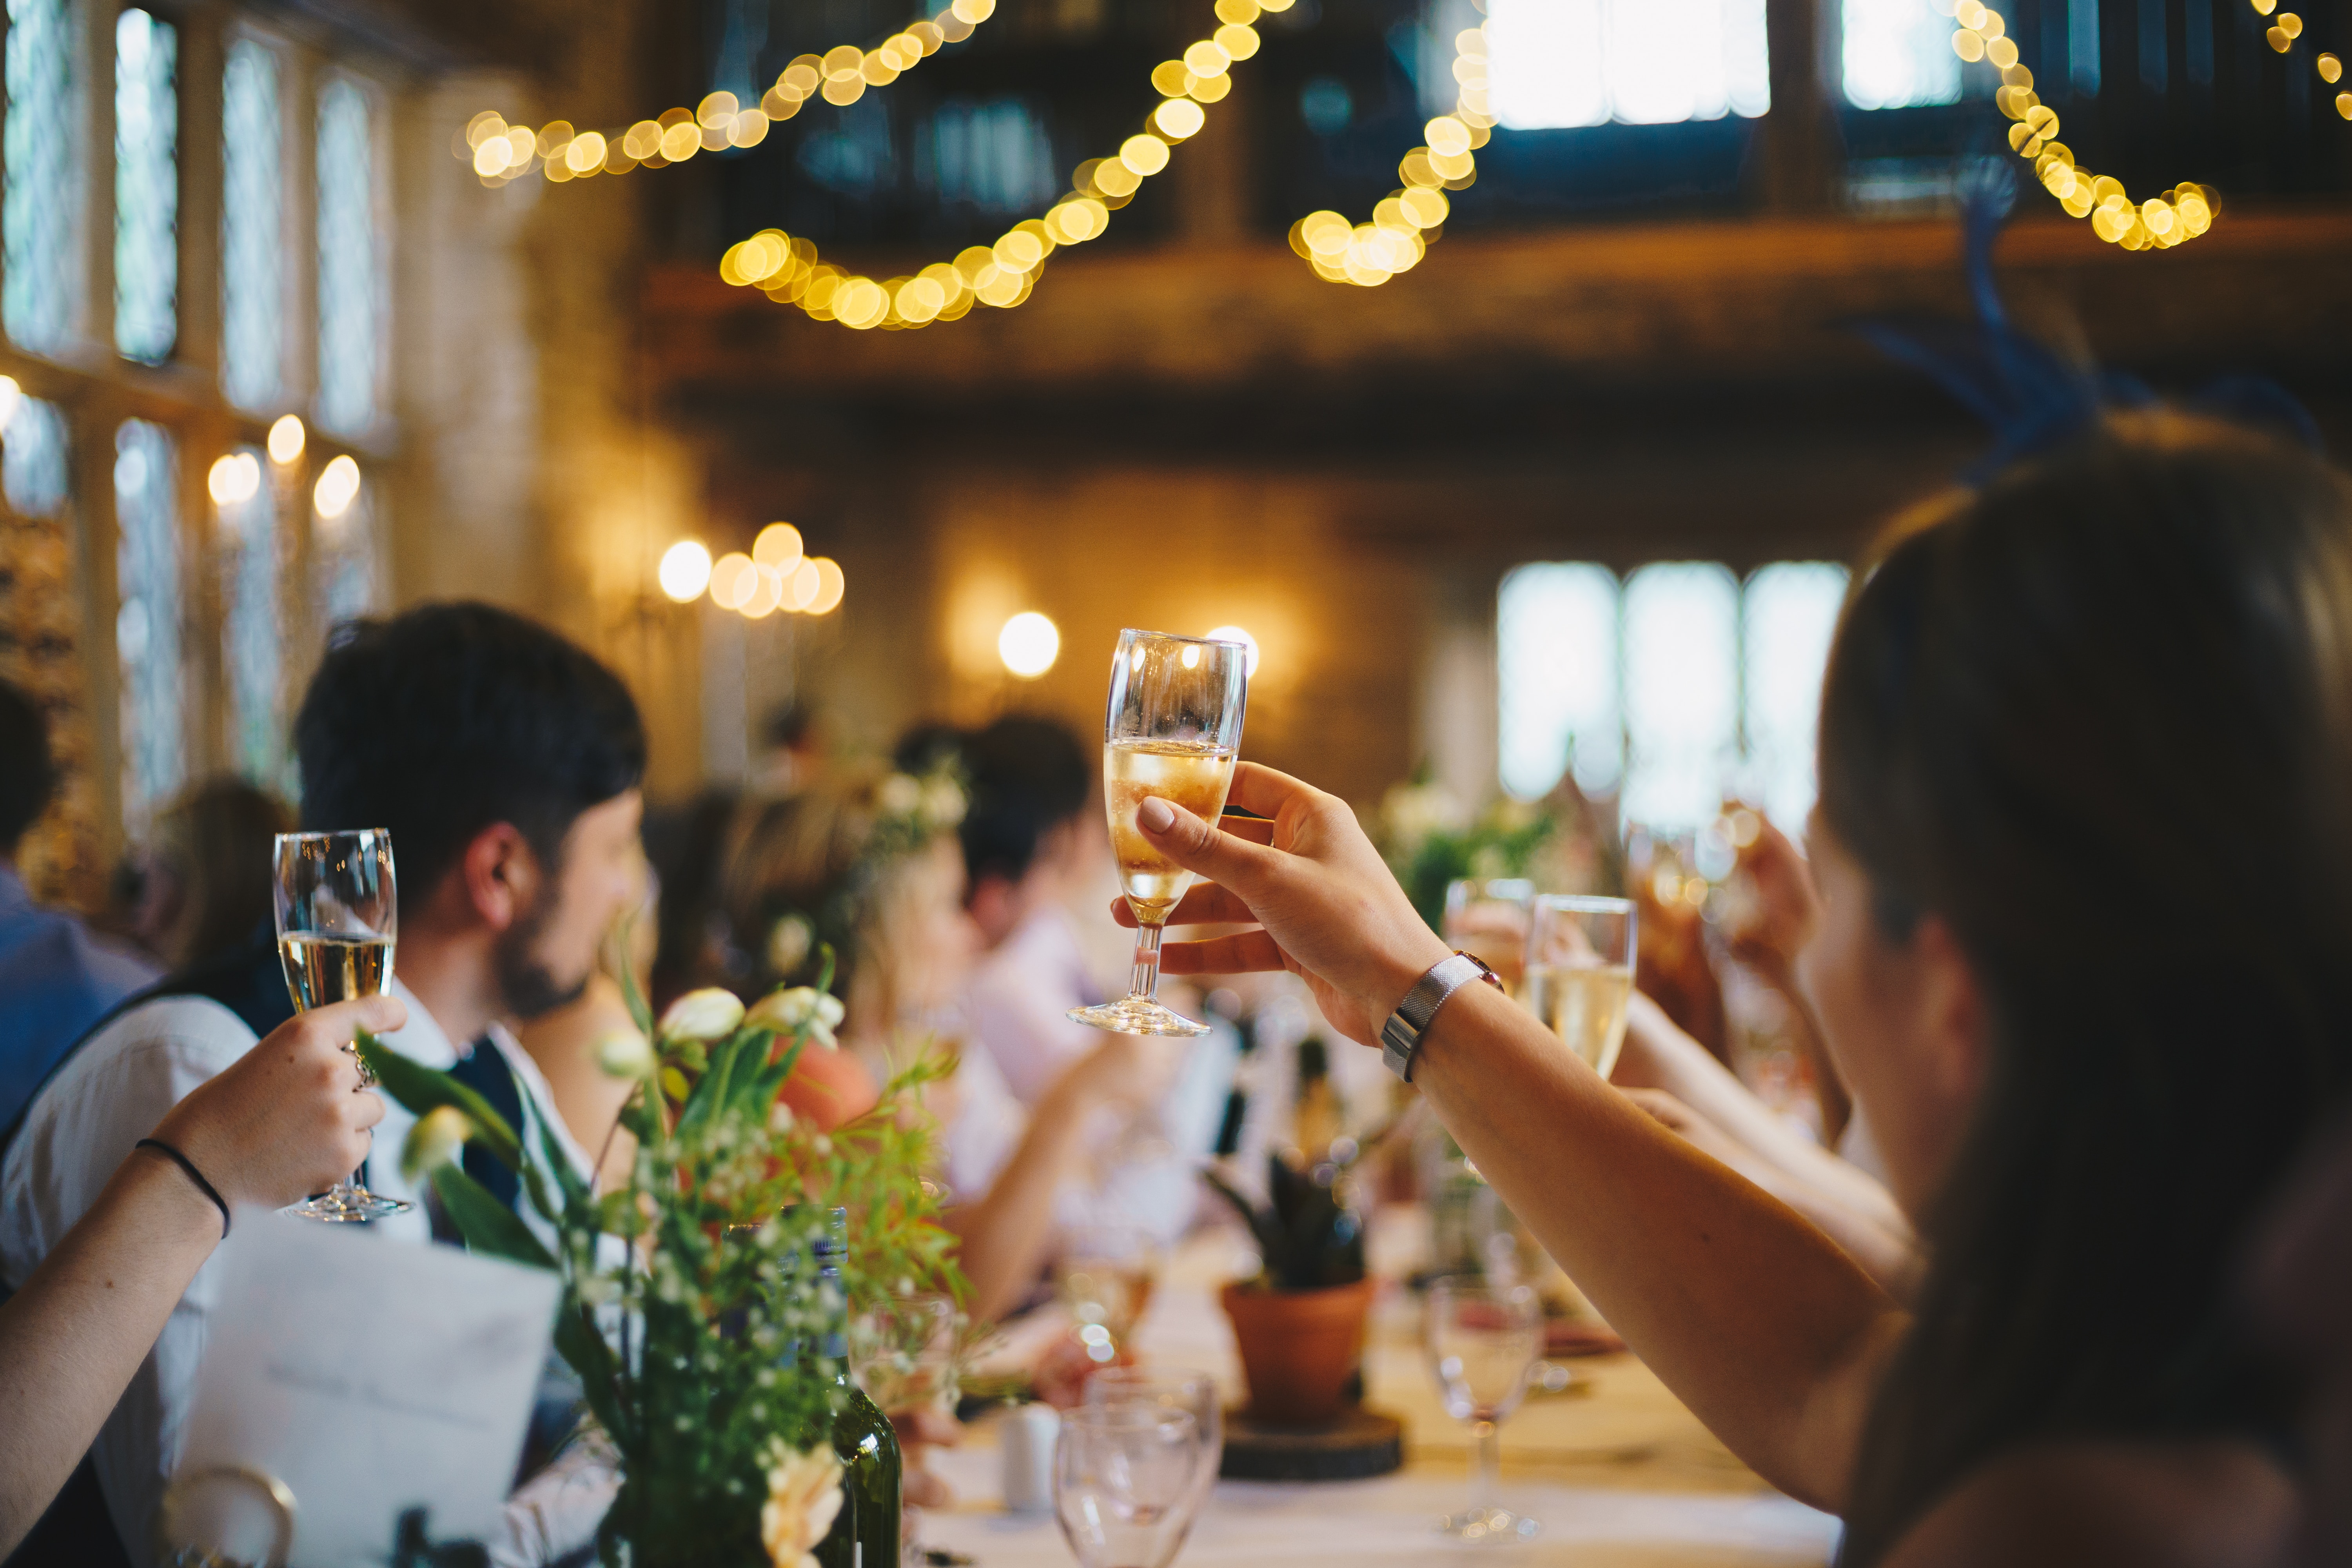 7 Simple but Important Event and buffet Tips for any Party be it a wedding or Corporate do